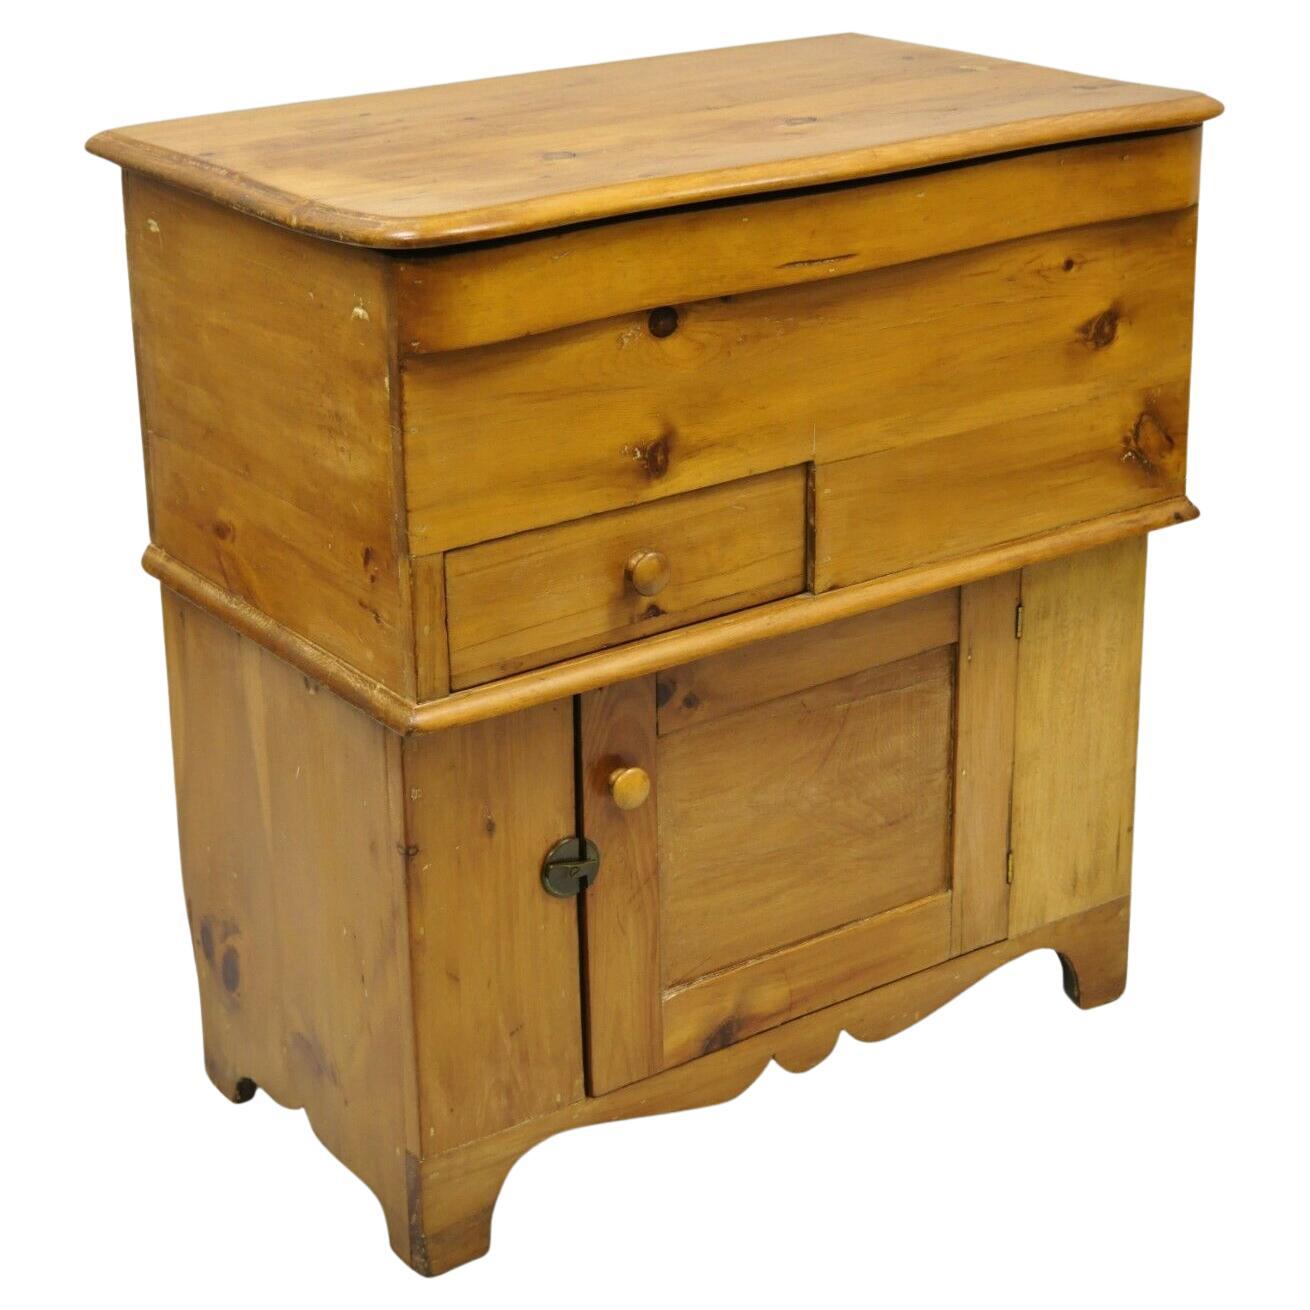 Antique 19th C. Primitive Pine Wood Lift Top Dry Sink Washstand Commode Cabinet For Sale